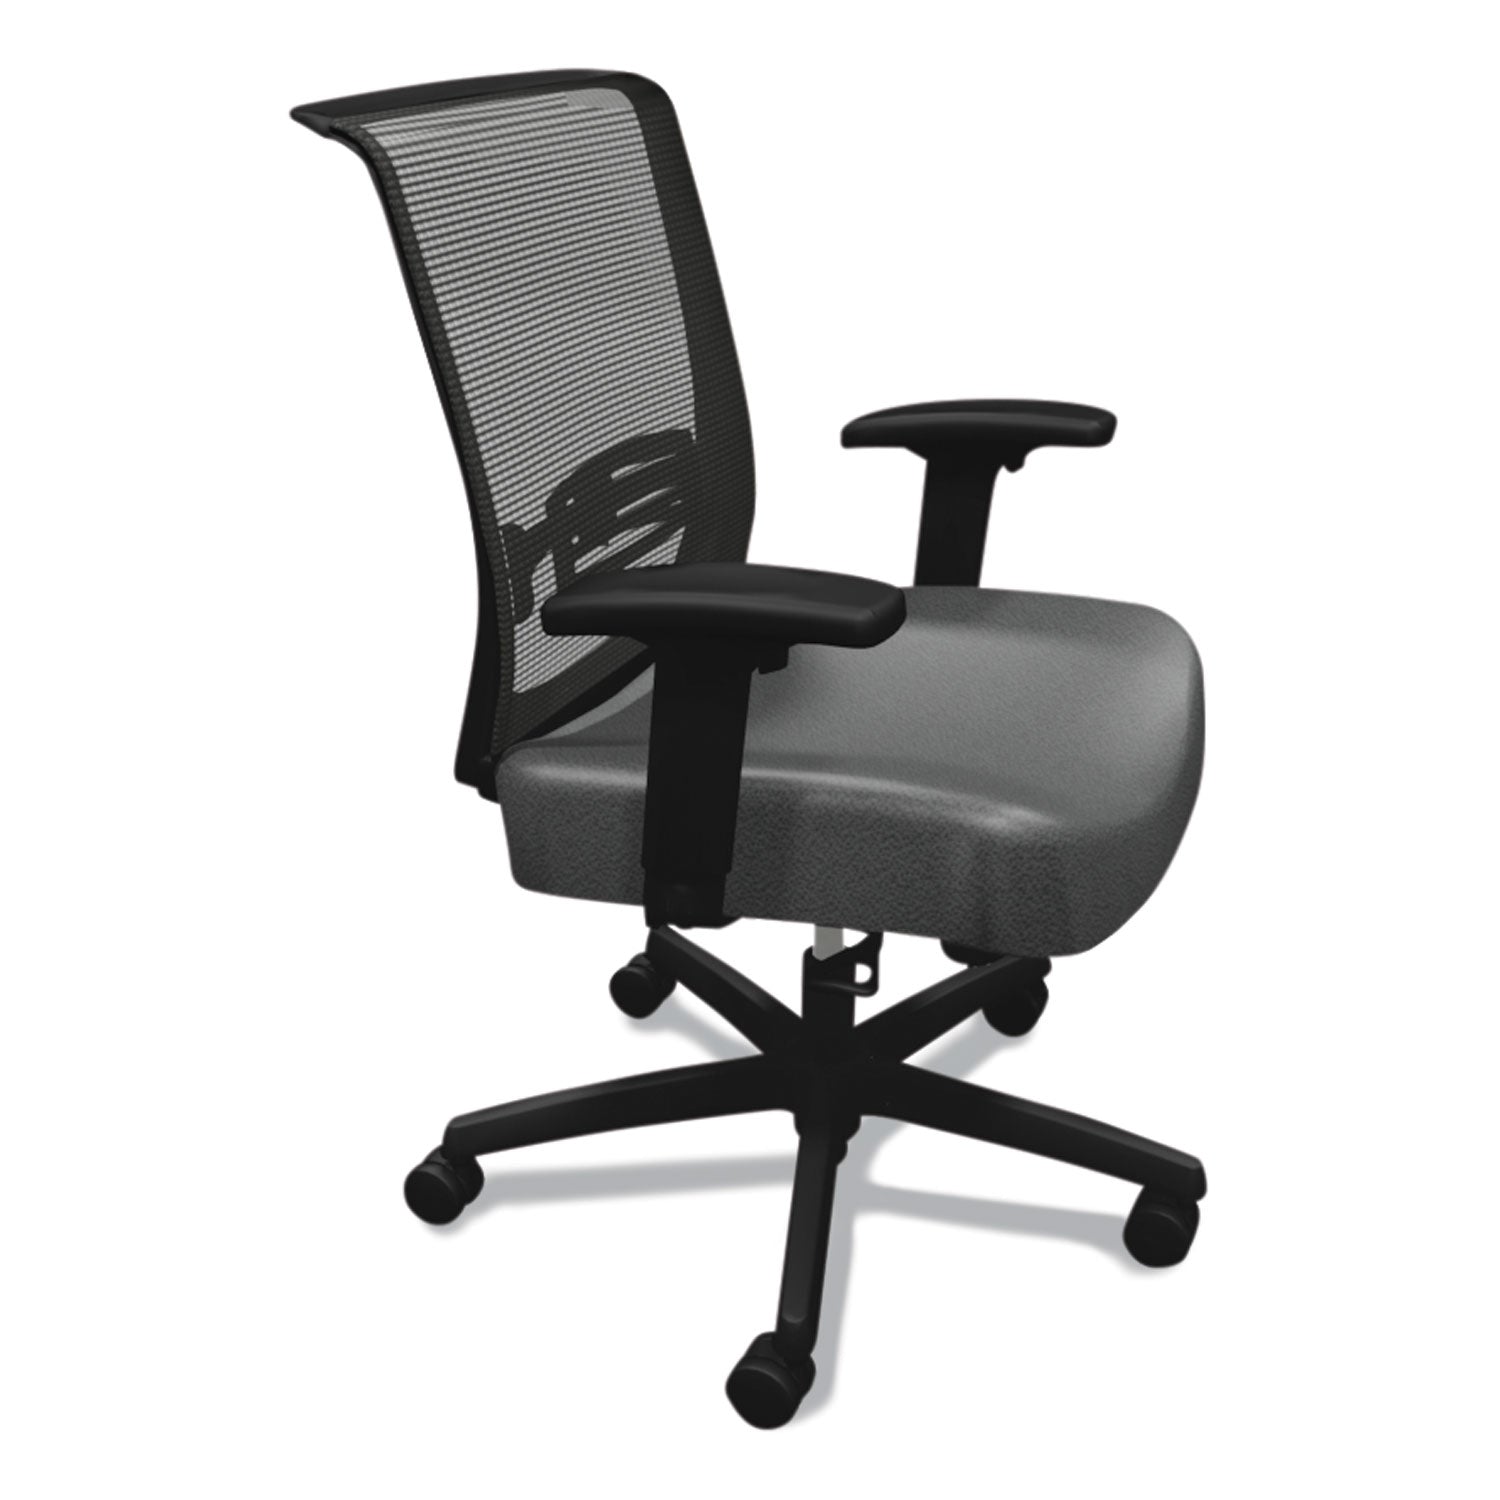 convergence-mid-back-task-chair-swivel-tilt-supports-up-to-275-lb-165-to-21-seat-height-iron-ore-seat-black-back-base_honcmz1acu19 - 3